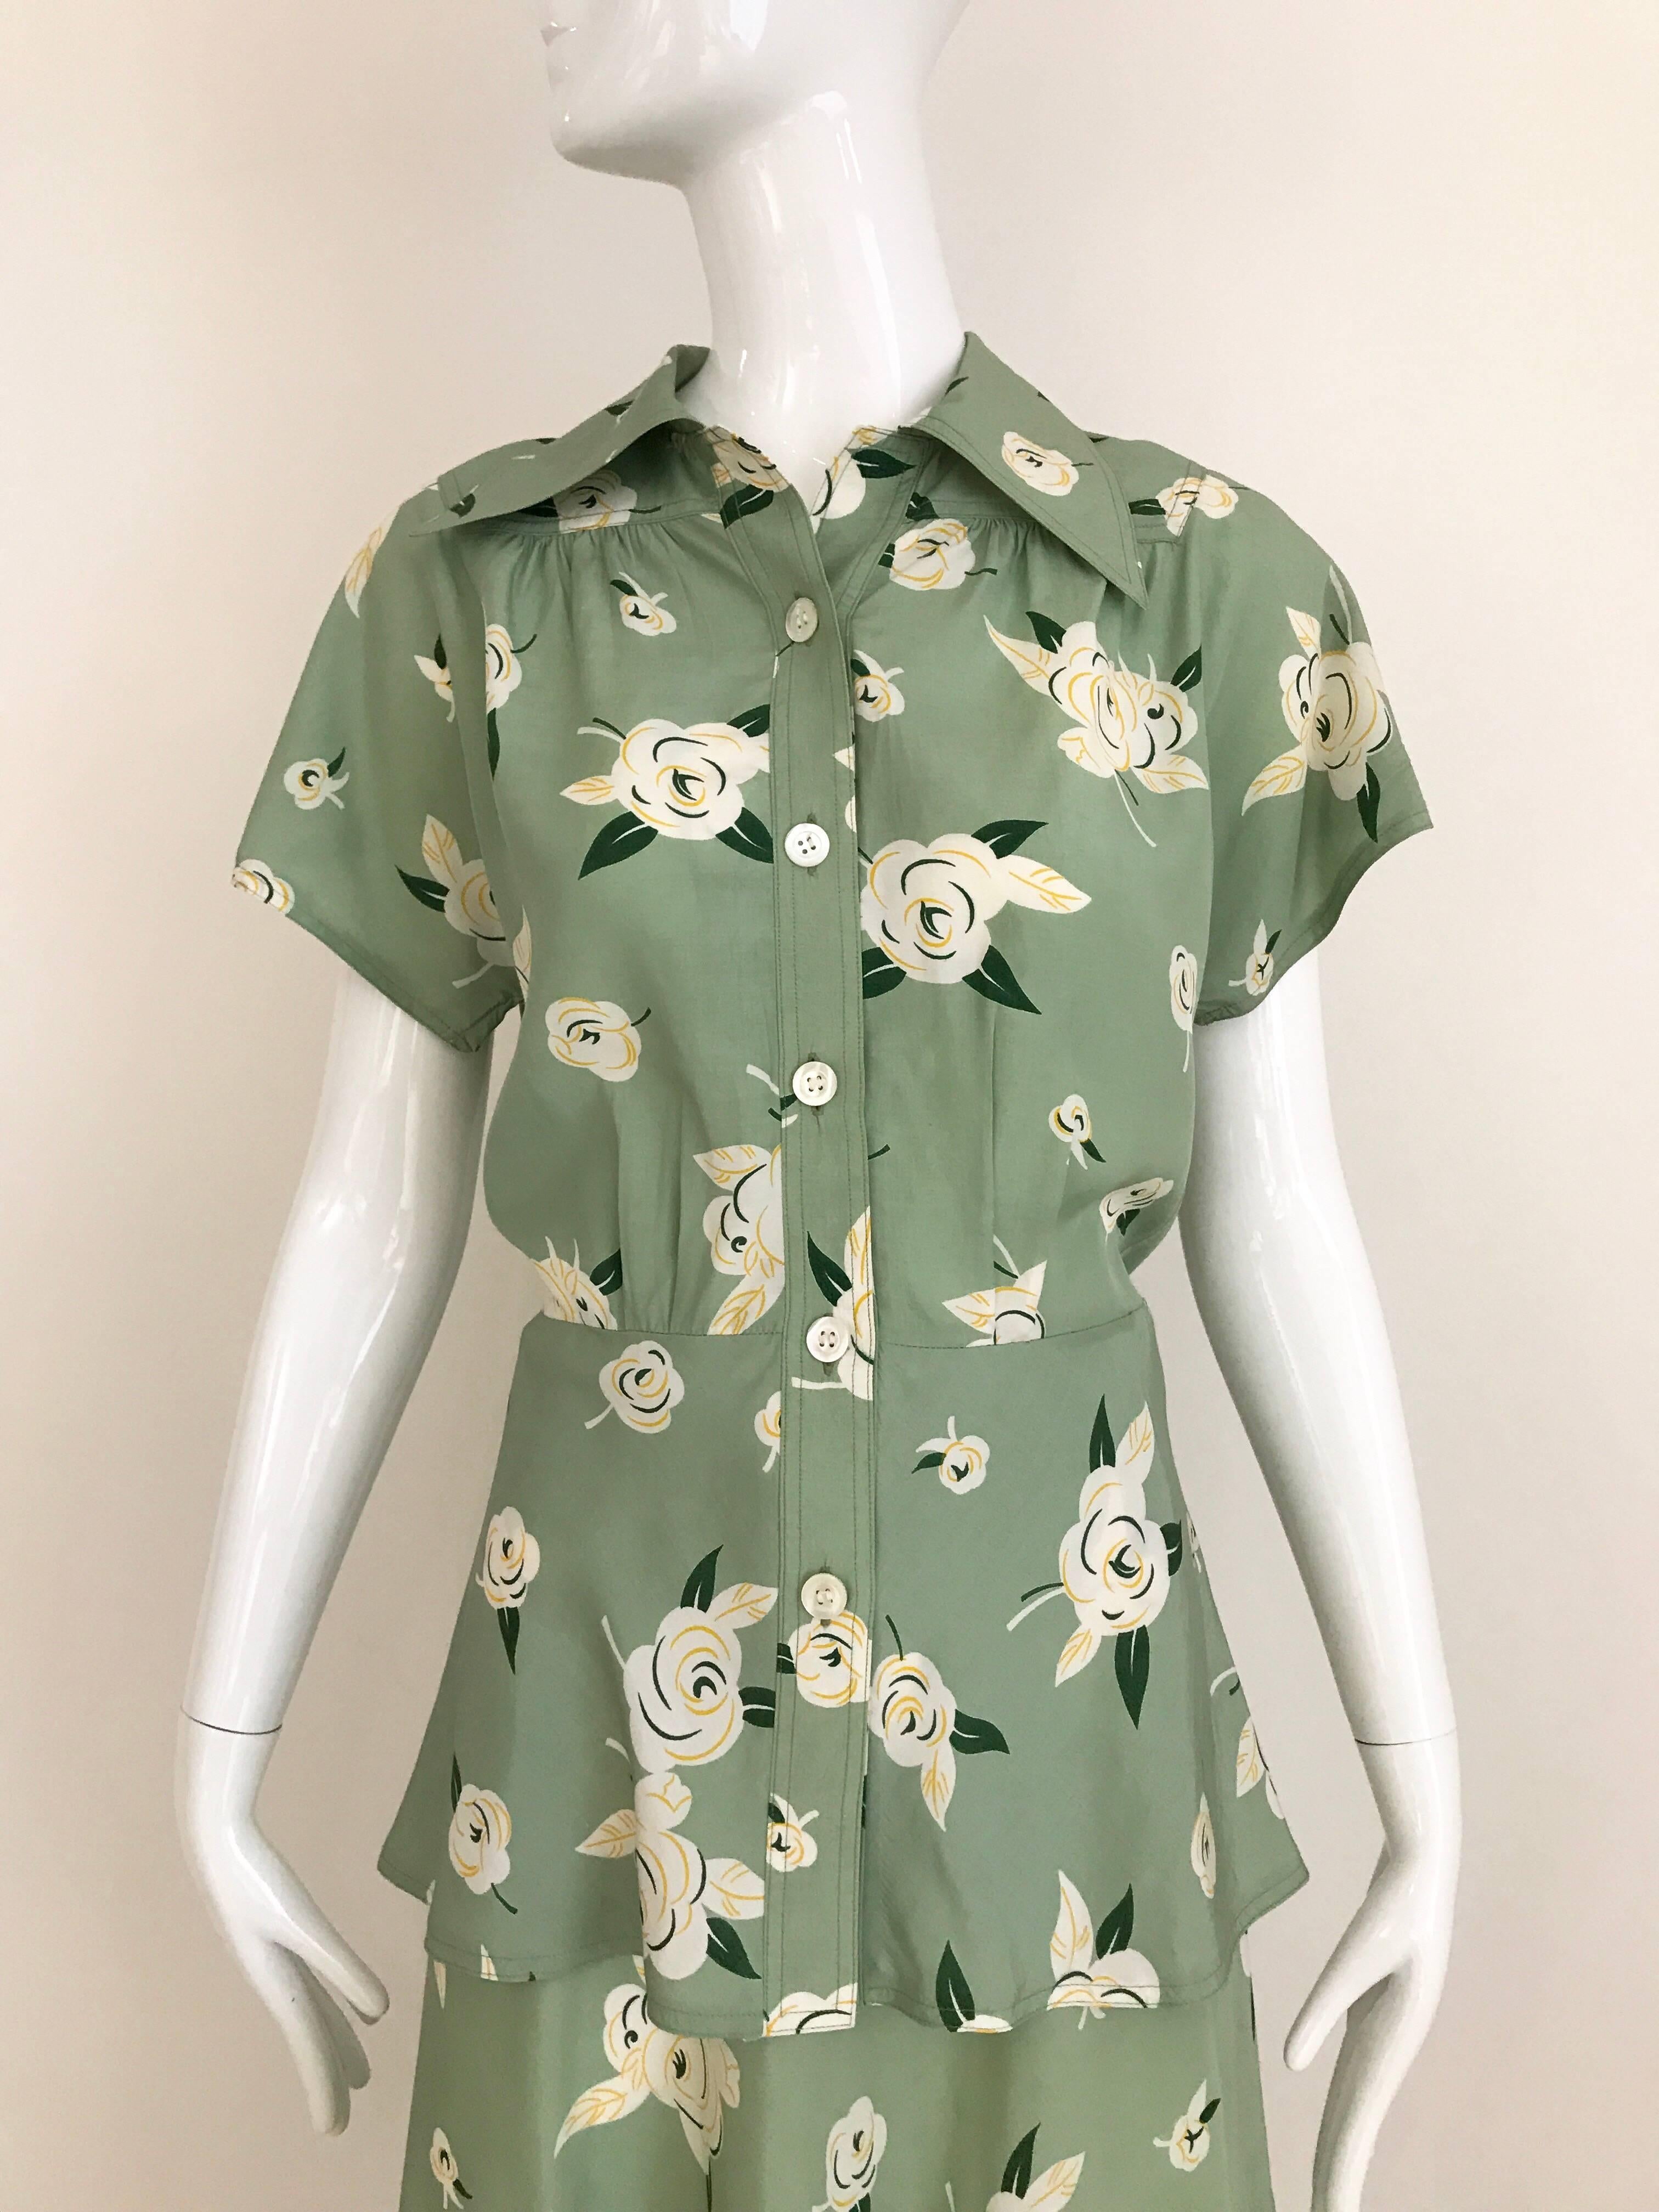 1970s Guy Laroche light green floral print blouse and skirt set. Blouse has slightly peplum style. 
Size: small 4
Blouse measurement: Bust 36 inches/ Blouse Waist 30 inches /Length: 25 inch
Skirt waist: 26 inches, Hip 38 inches/ Skirt length: 30.5